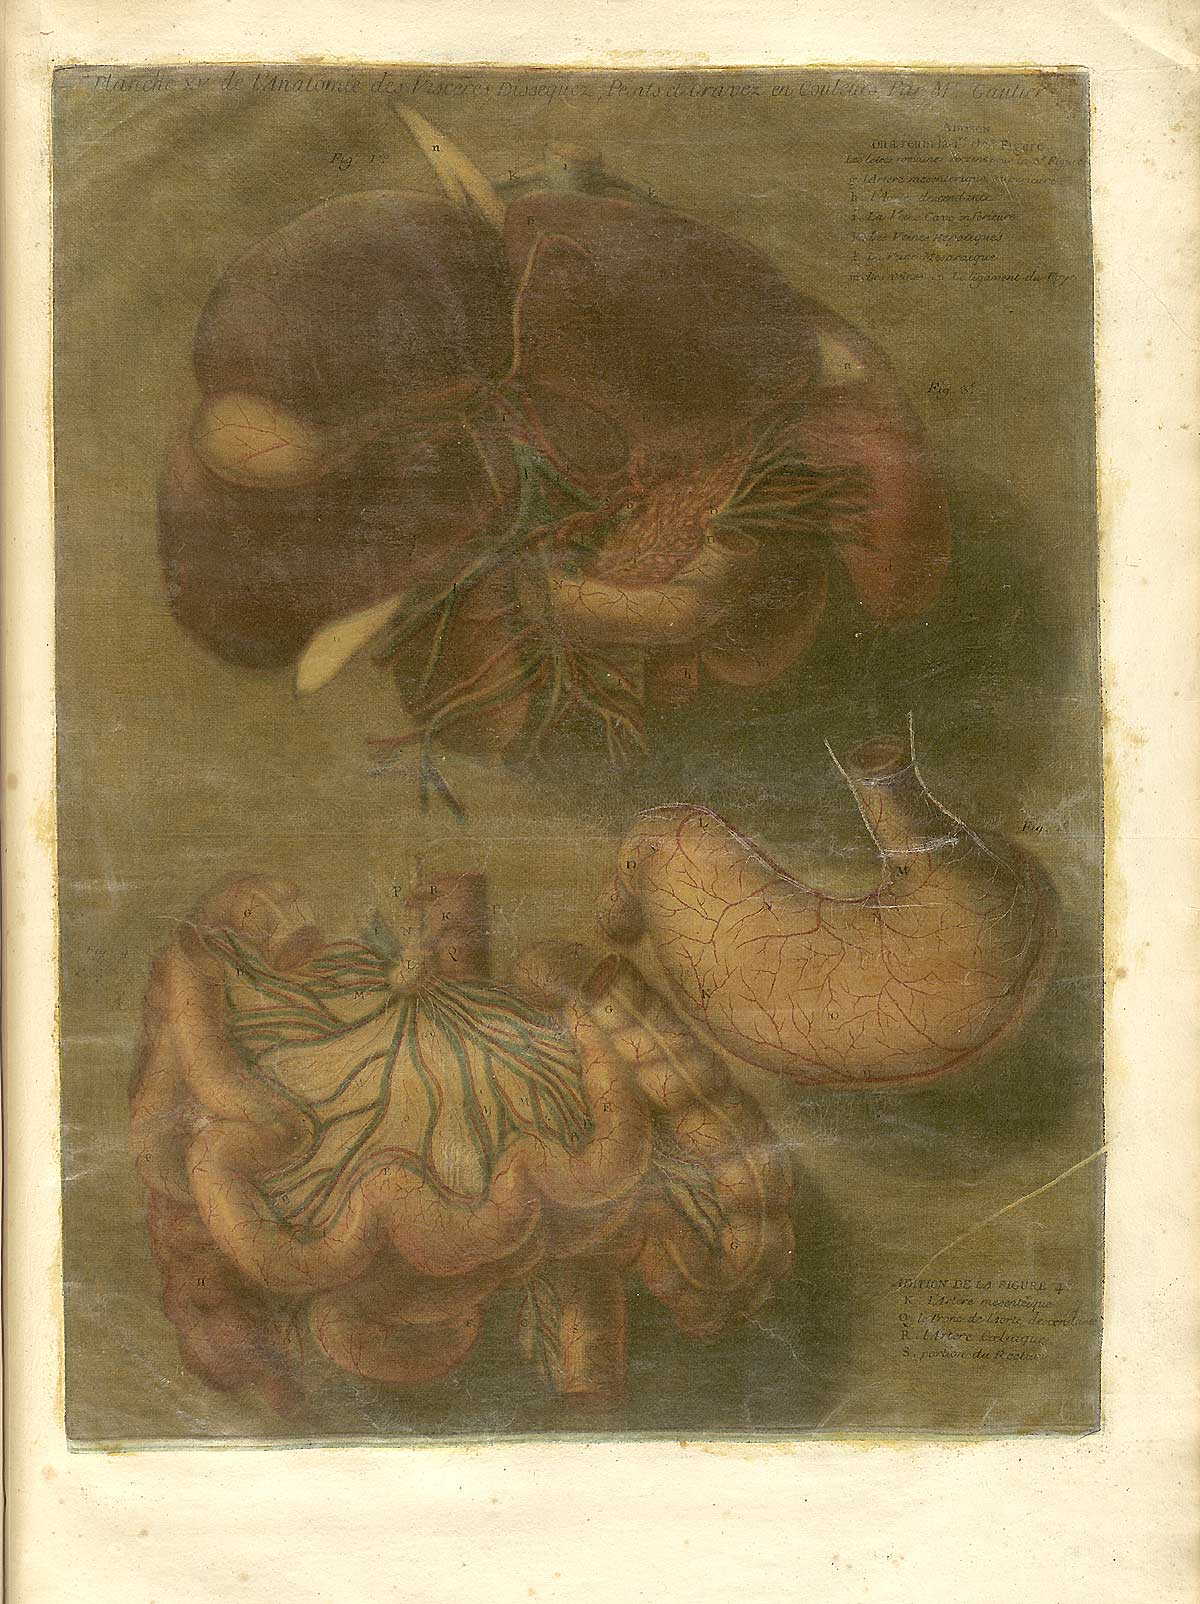 Color mezzotint of the internal organs, with the liver, spleen, kidneys and esophagus massed together at the top and the stomach and intestines at the bottom of the image; from Jacques Fabian Gautier d’Agoty’s Anatomie générale des viscères en situation, NLM Call no.: WZ 260 G283c 1745.